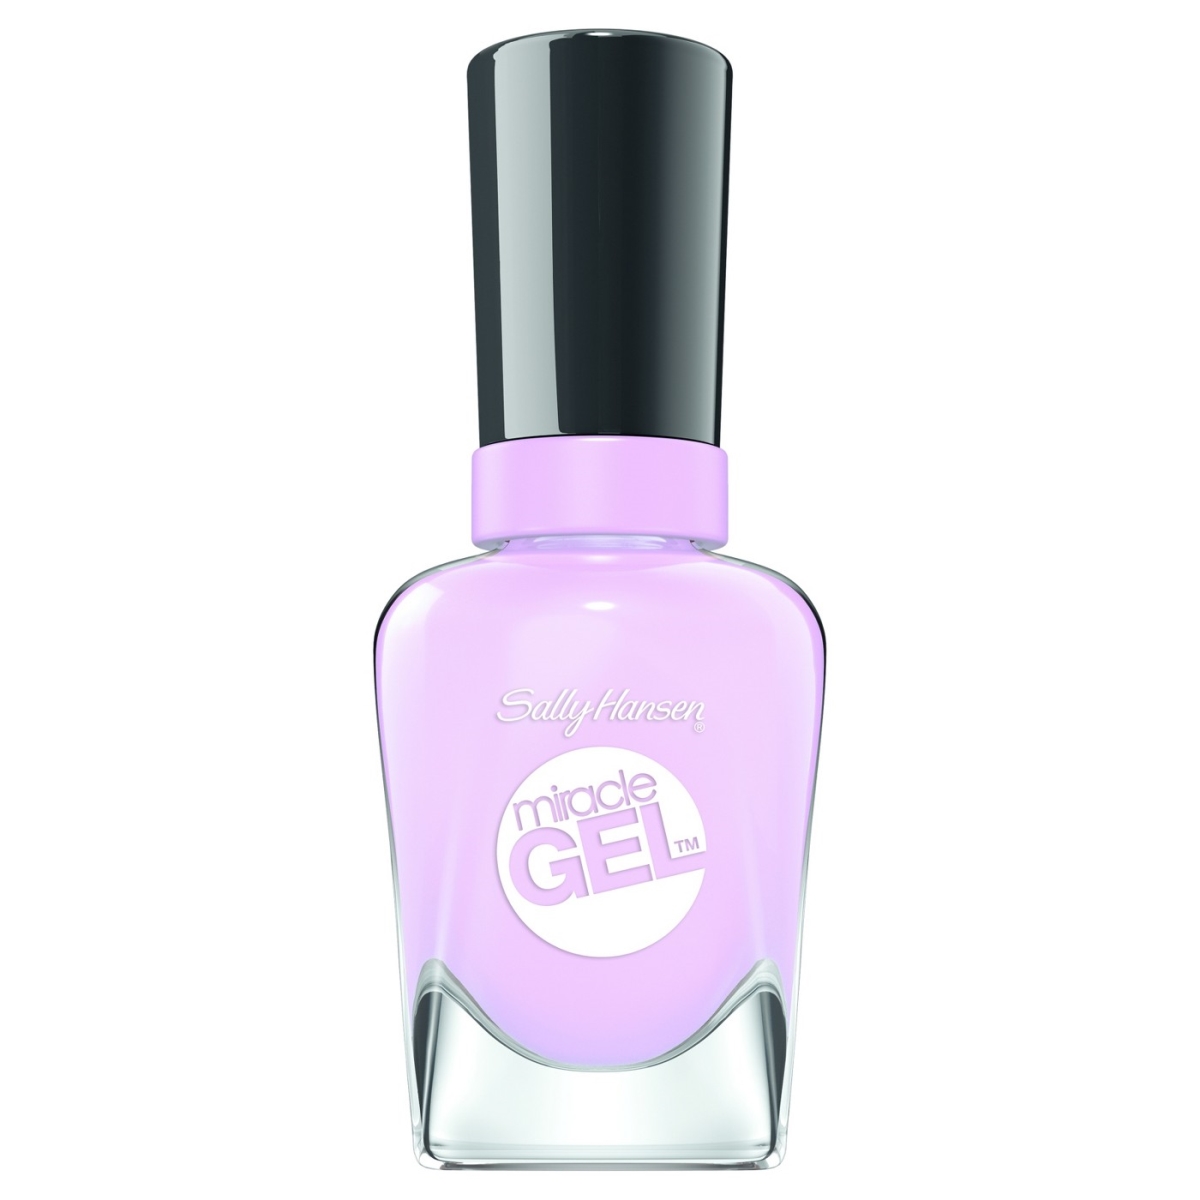 Coty Us 7513909 Sally Hansen Miracle Gel Nail Polish, 534 Orchid-ing Aside - Pack Of 2